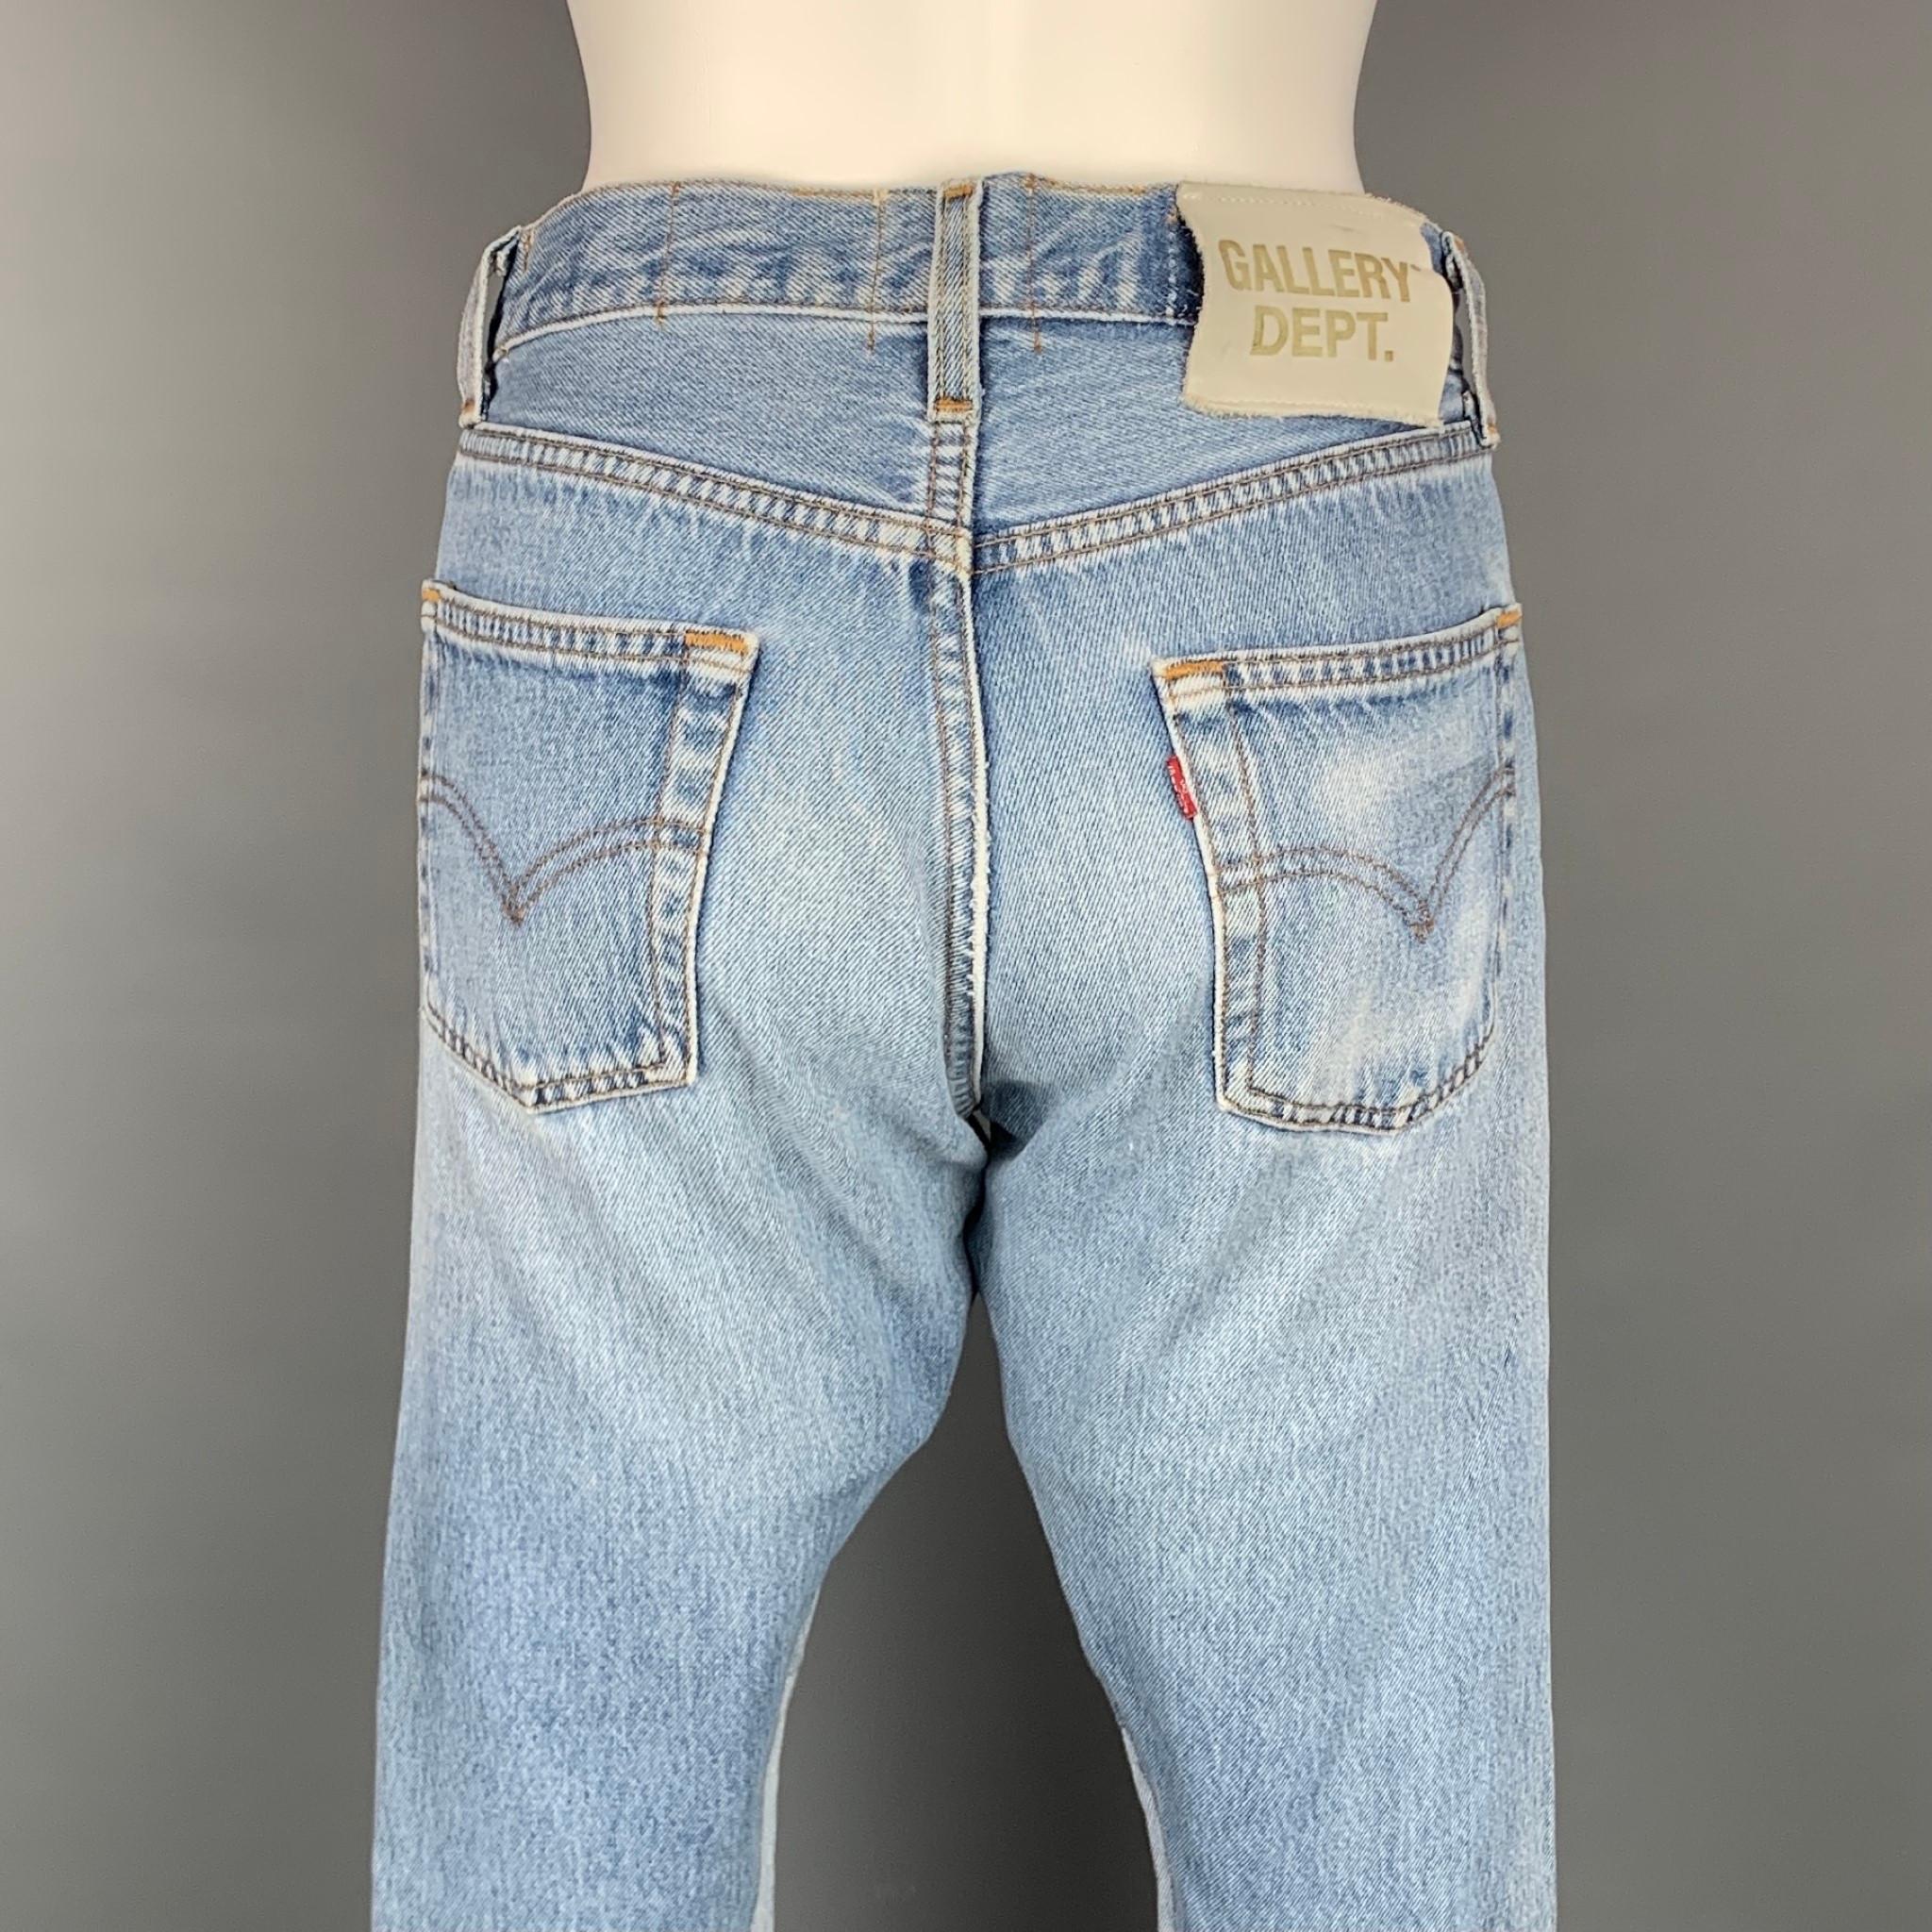 gallery dept womens jeans